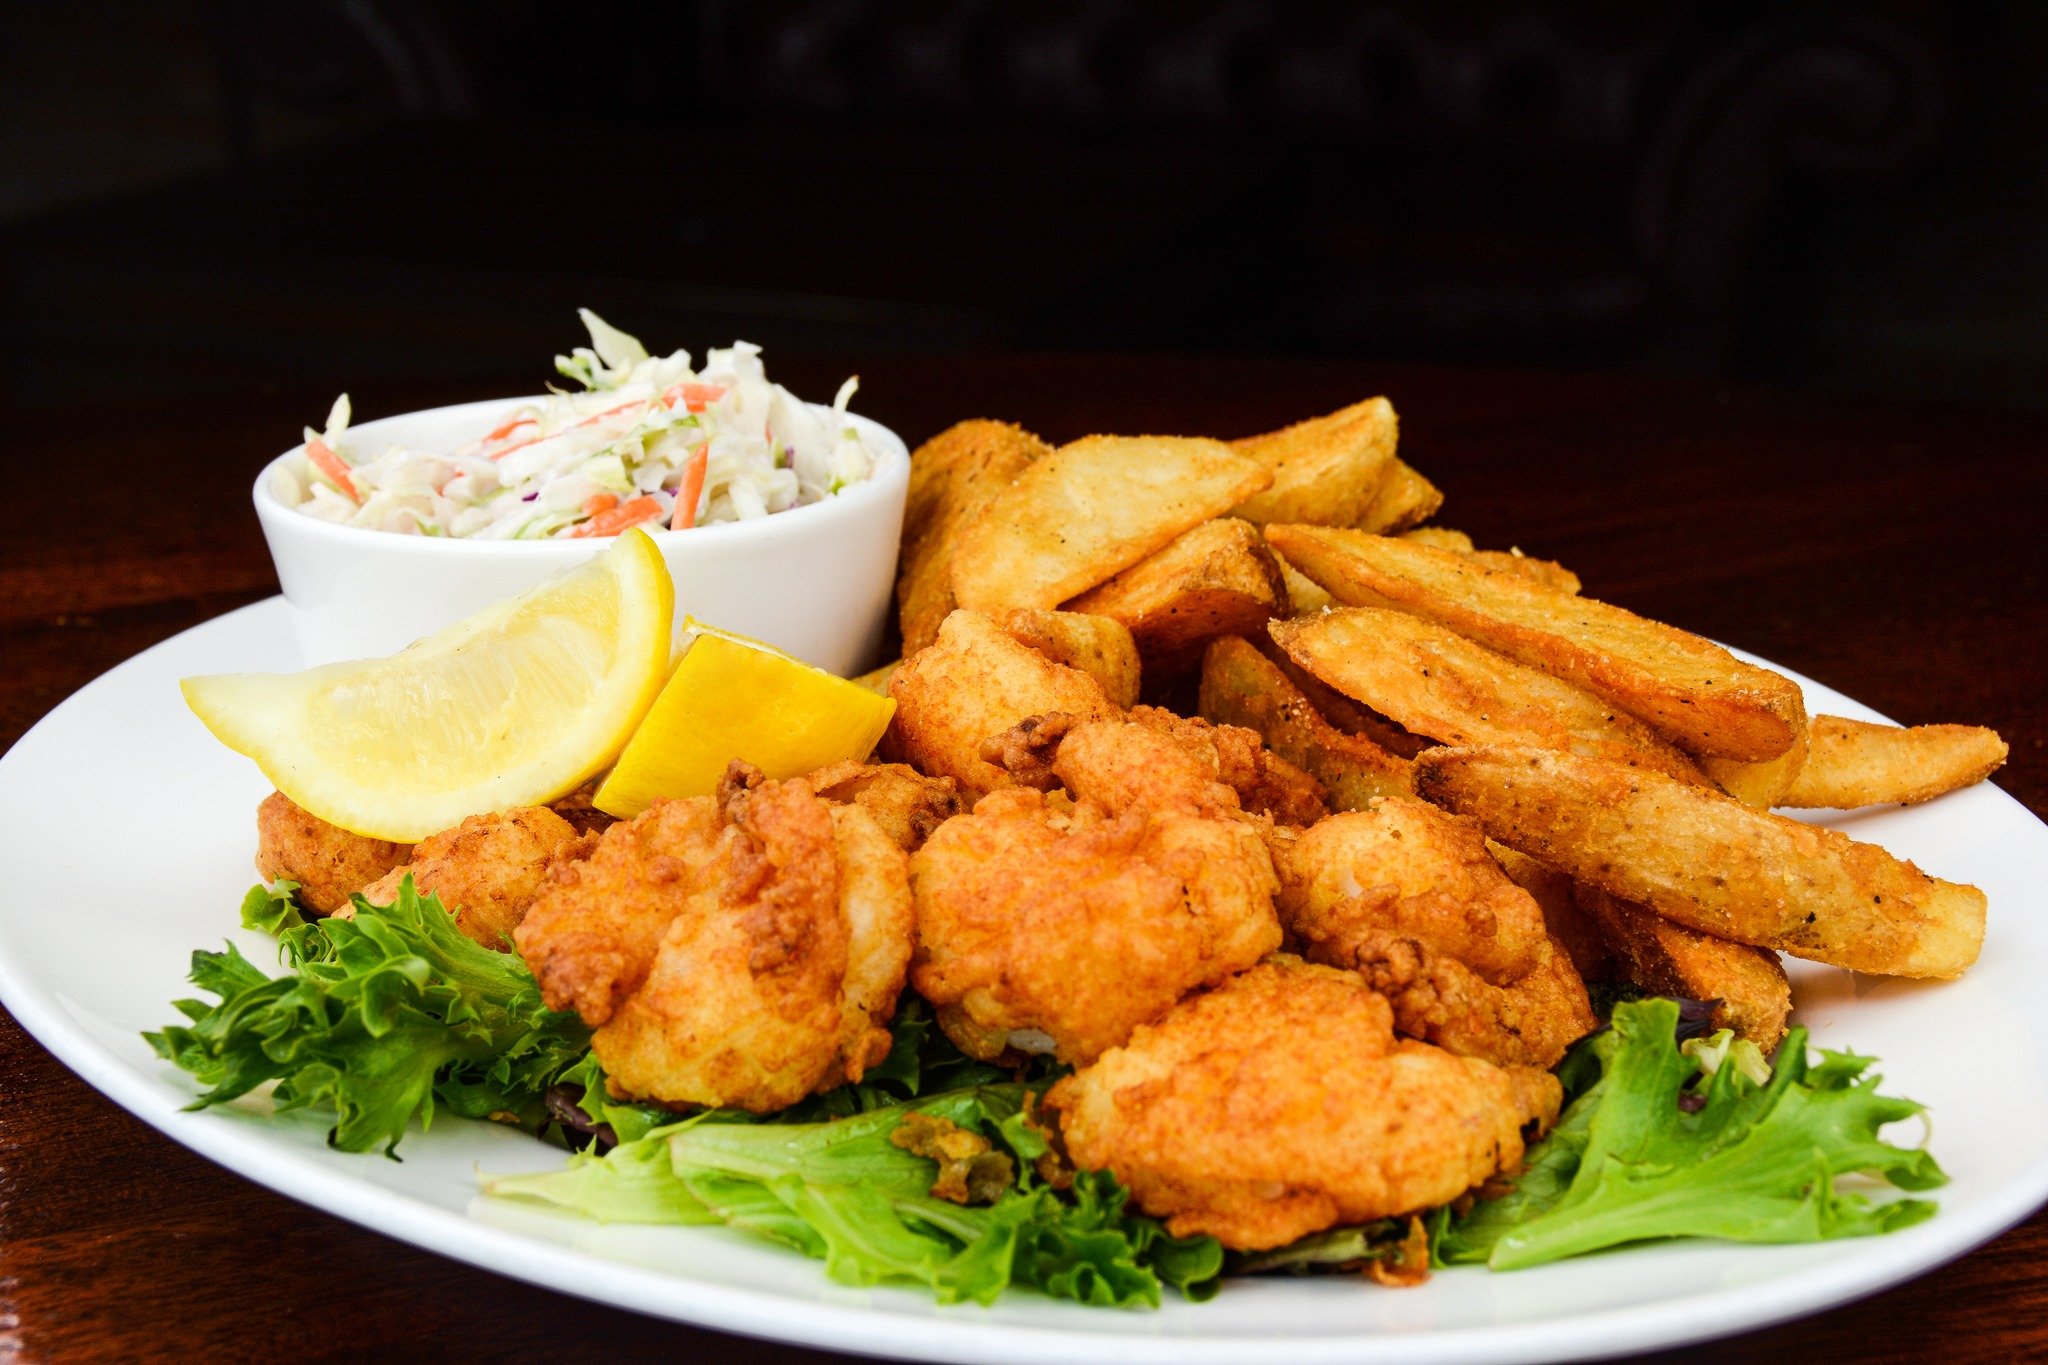 🍤 Treat yourself to a coastal classic with our Calabash Fried Shrimp Platter! Crispy fried shrimp, paired with tangy slaw and your favorite side dish. It's the ultimate seafood experience! 🌊 

#madboarnc #wallacenc #exit385 #FriedShrimp #CoastalEat